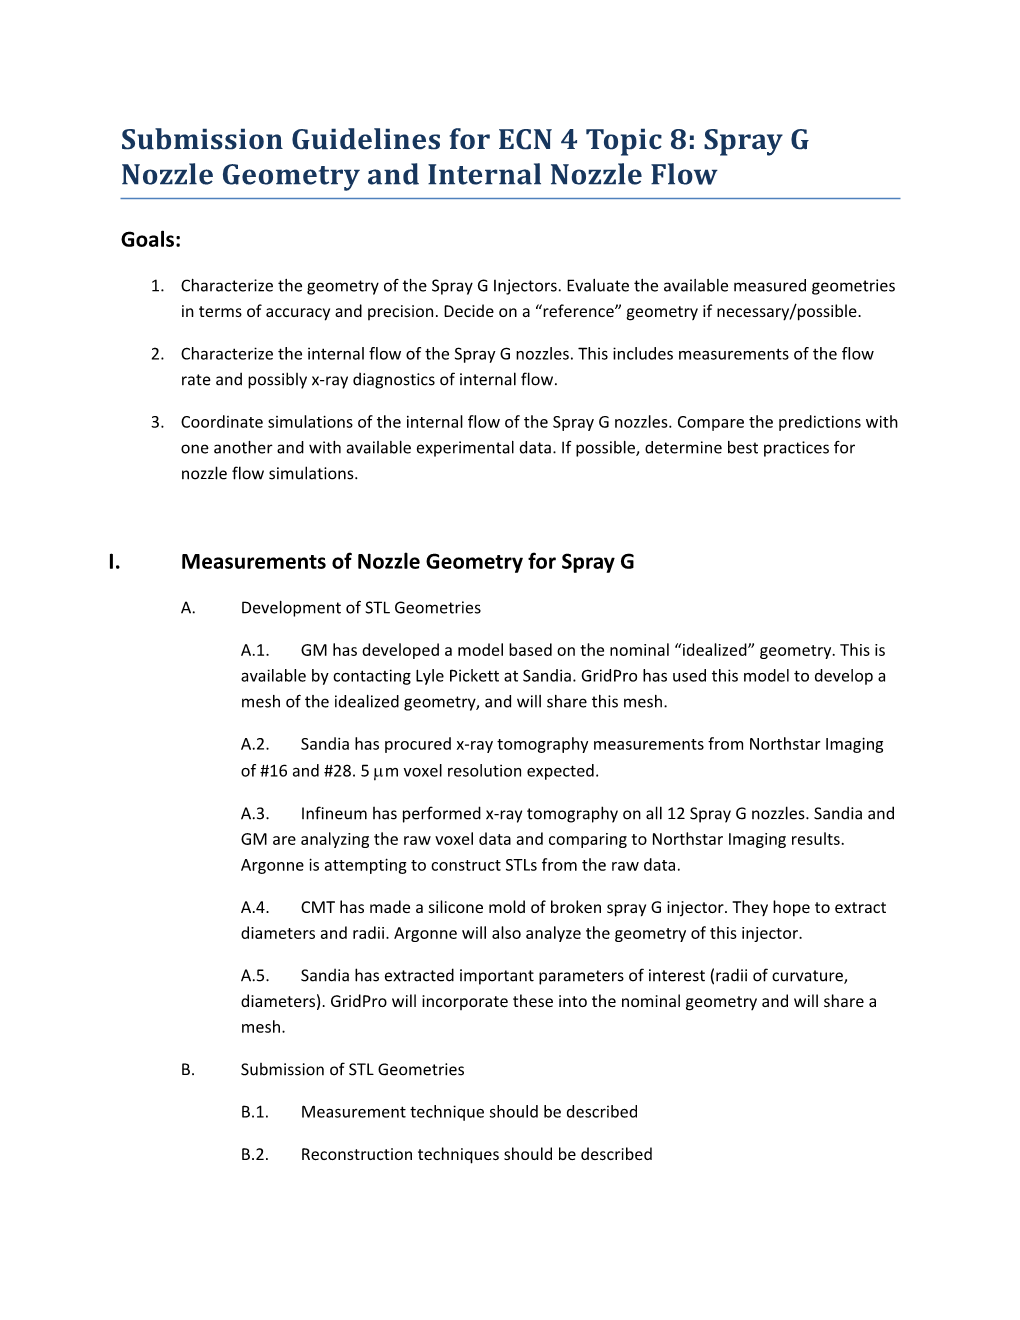 Submission Guidelines for ECN 4 Topic 8: Spray G Nozzle Geometry and Internal Nozzle Flow